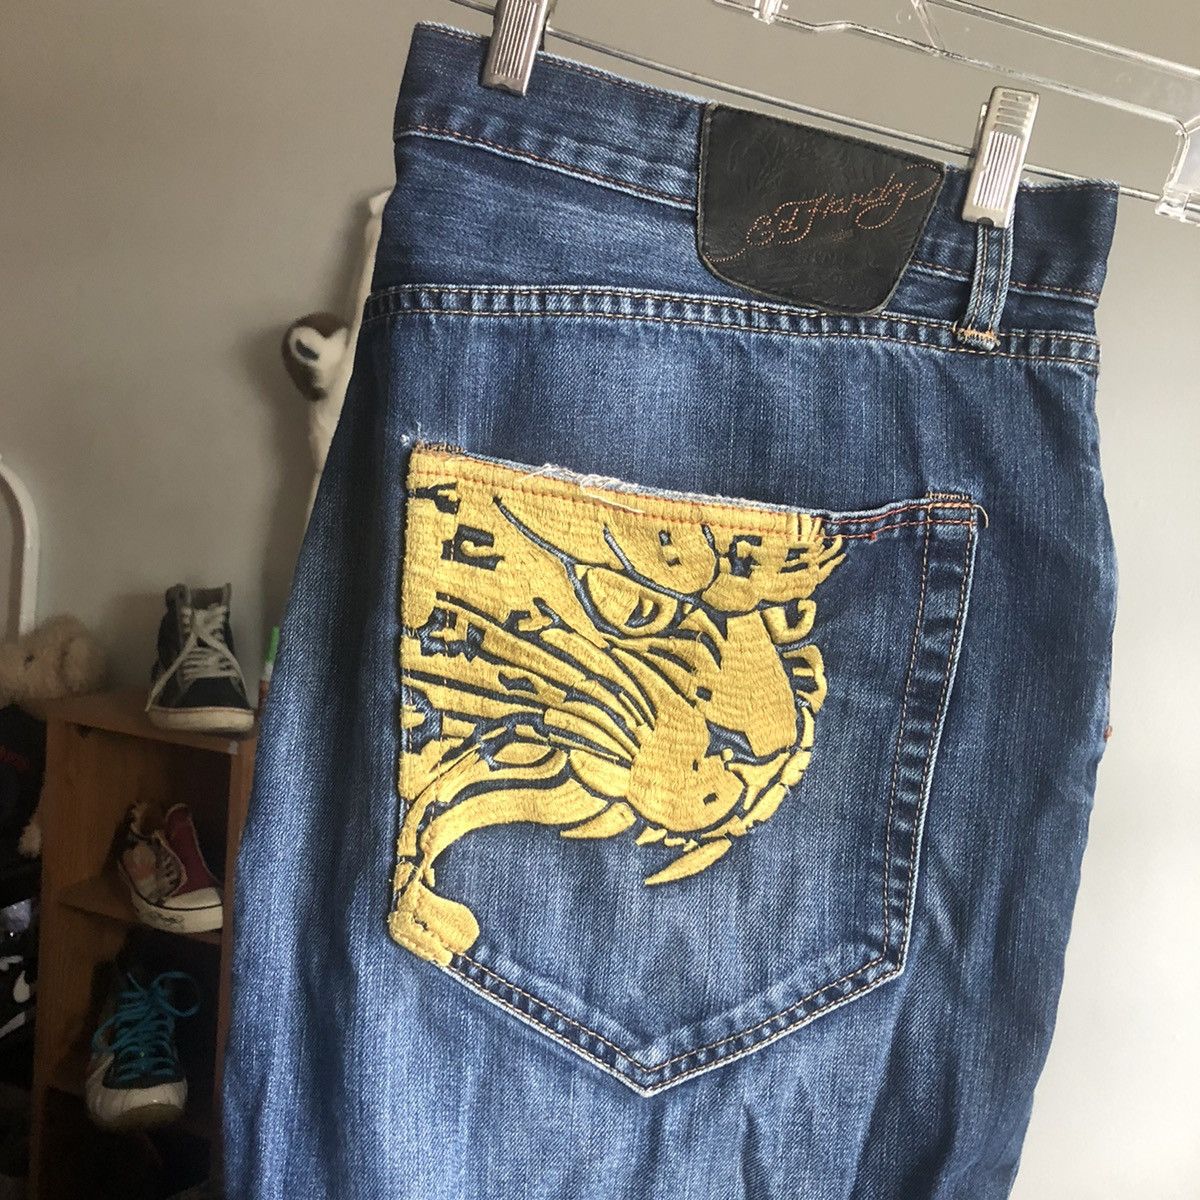 Pre-owned Christian Audigier X Ed Hardy Vintage Y2k Don Ed Hardy Lion Chainstitch Denim Jean Shorts In Washed Blue/yellow